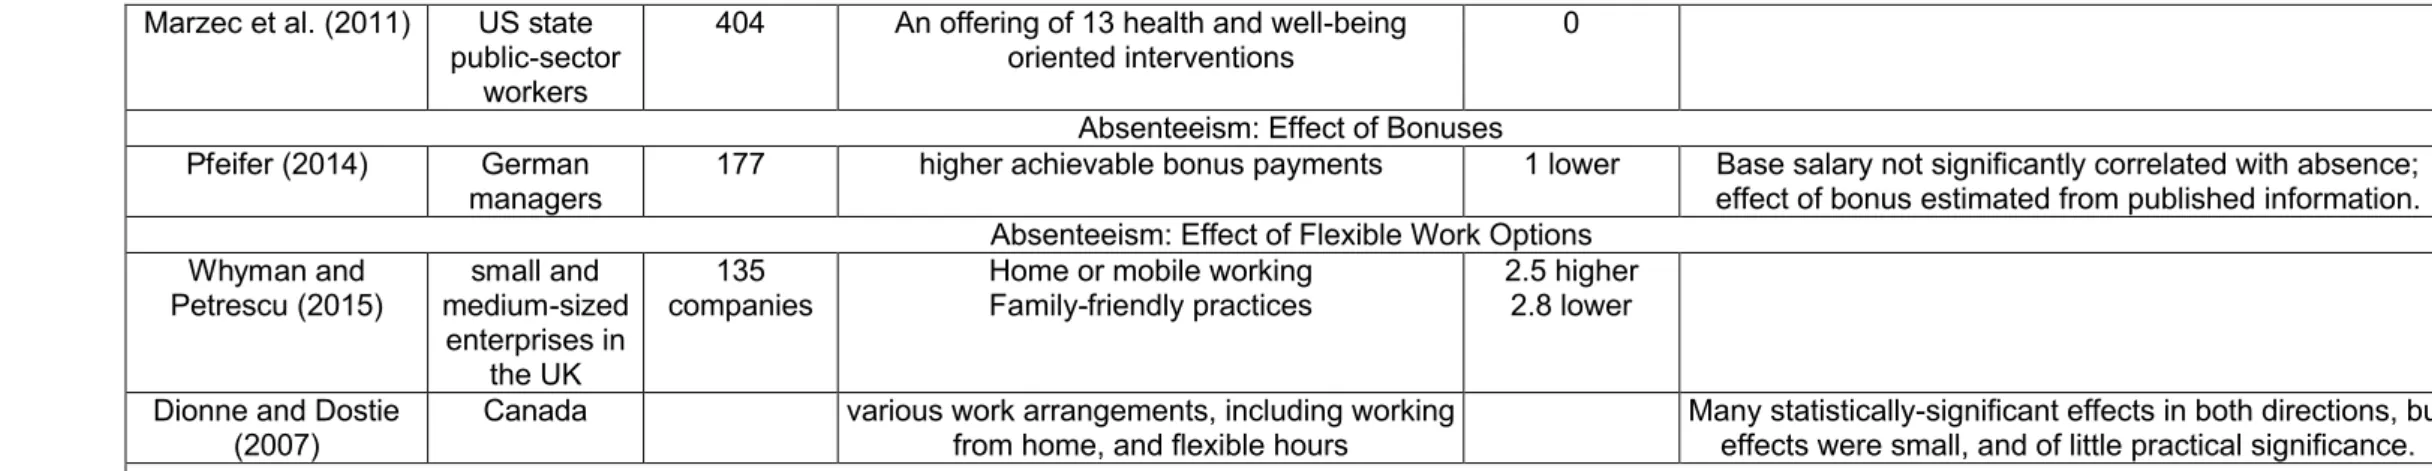 Table C1. Effects on absenteeism